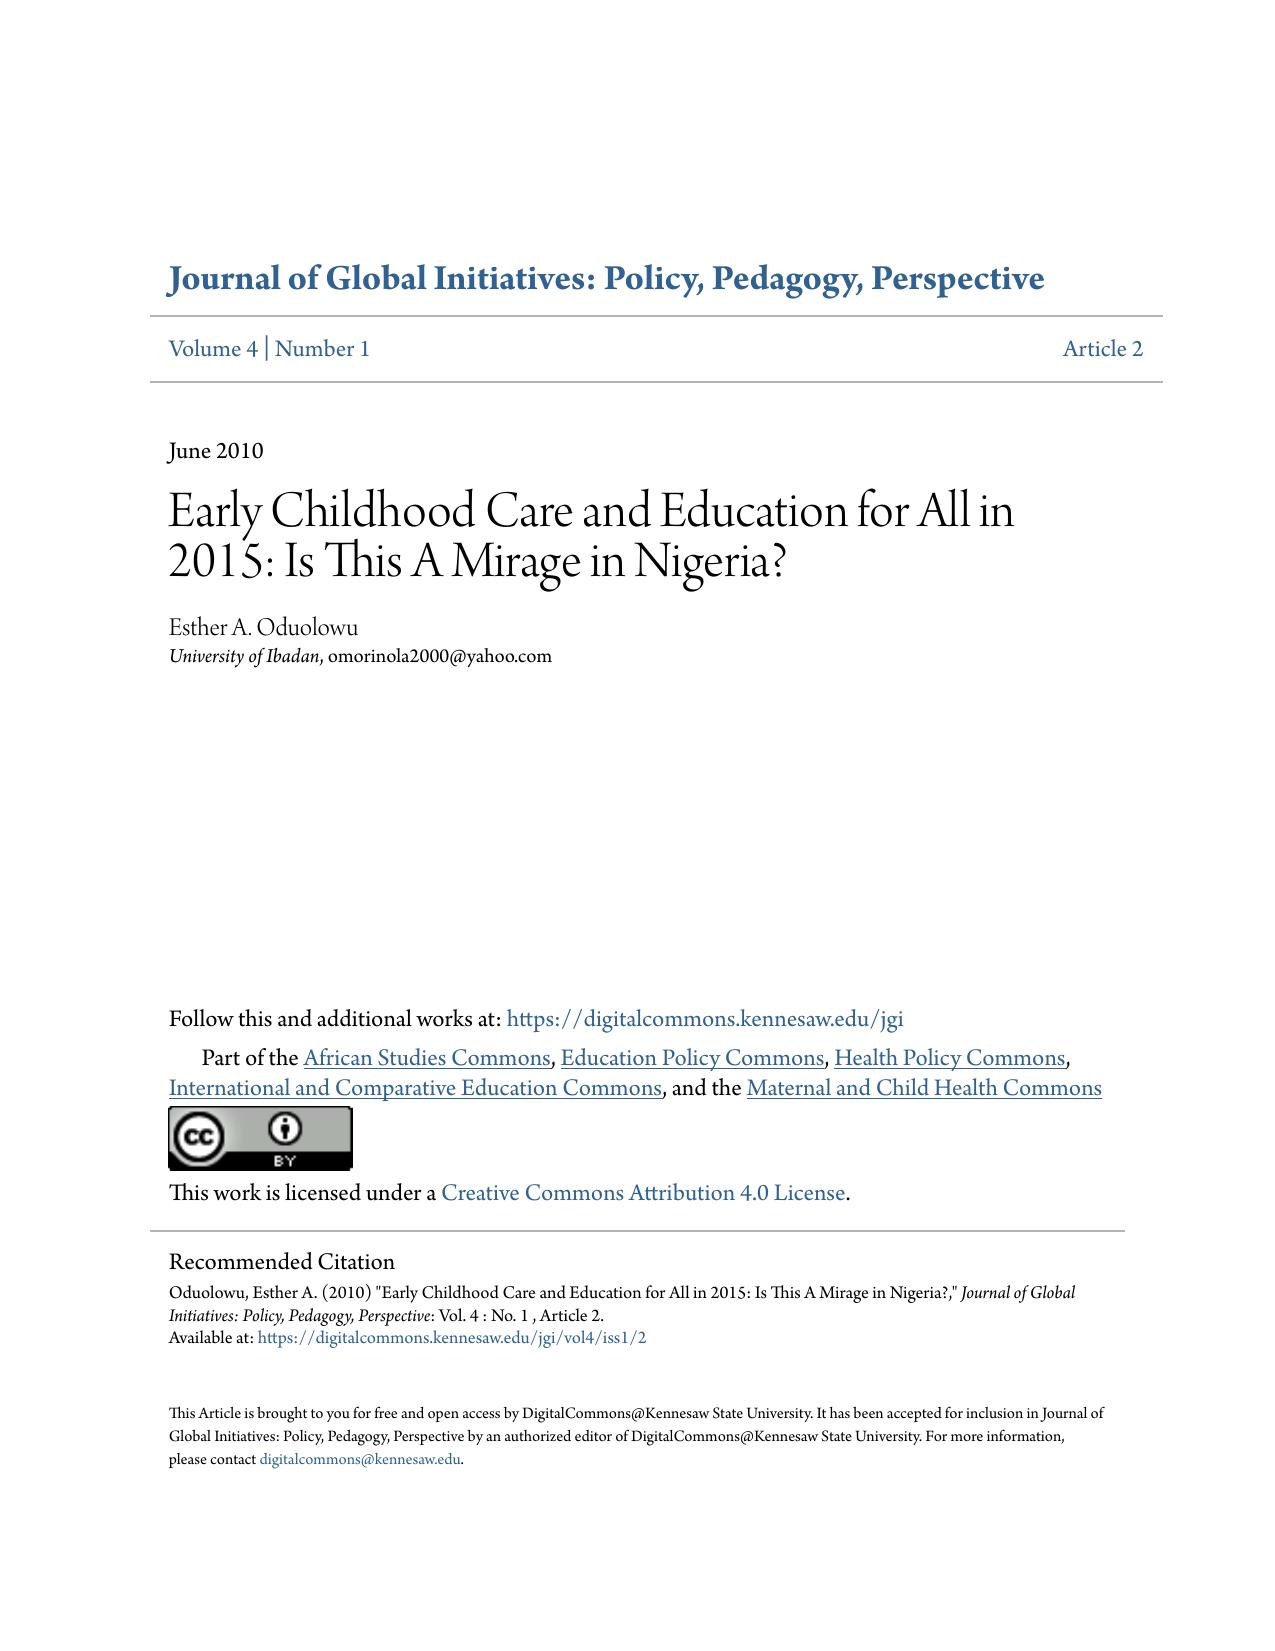 Early Childhood Care and Education for All in 2015: Is This A Mirage in Nigeria?